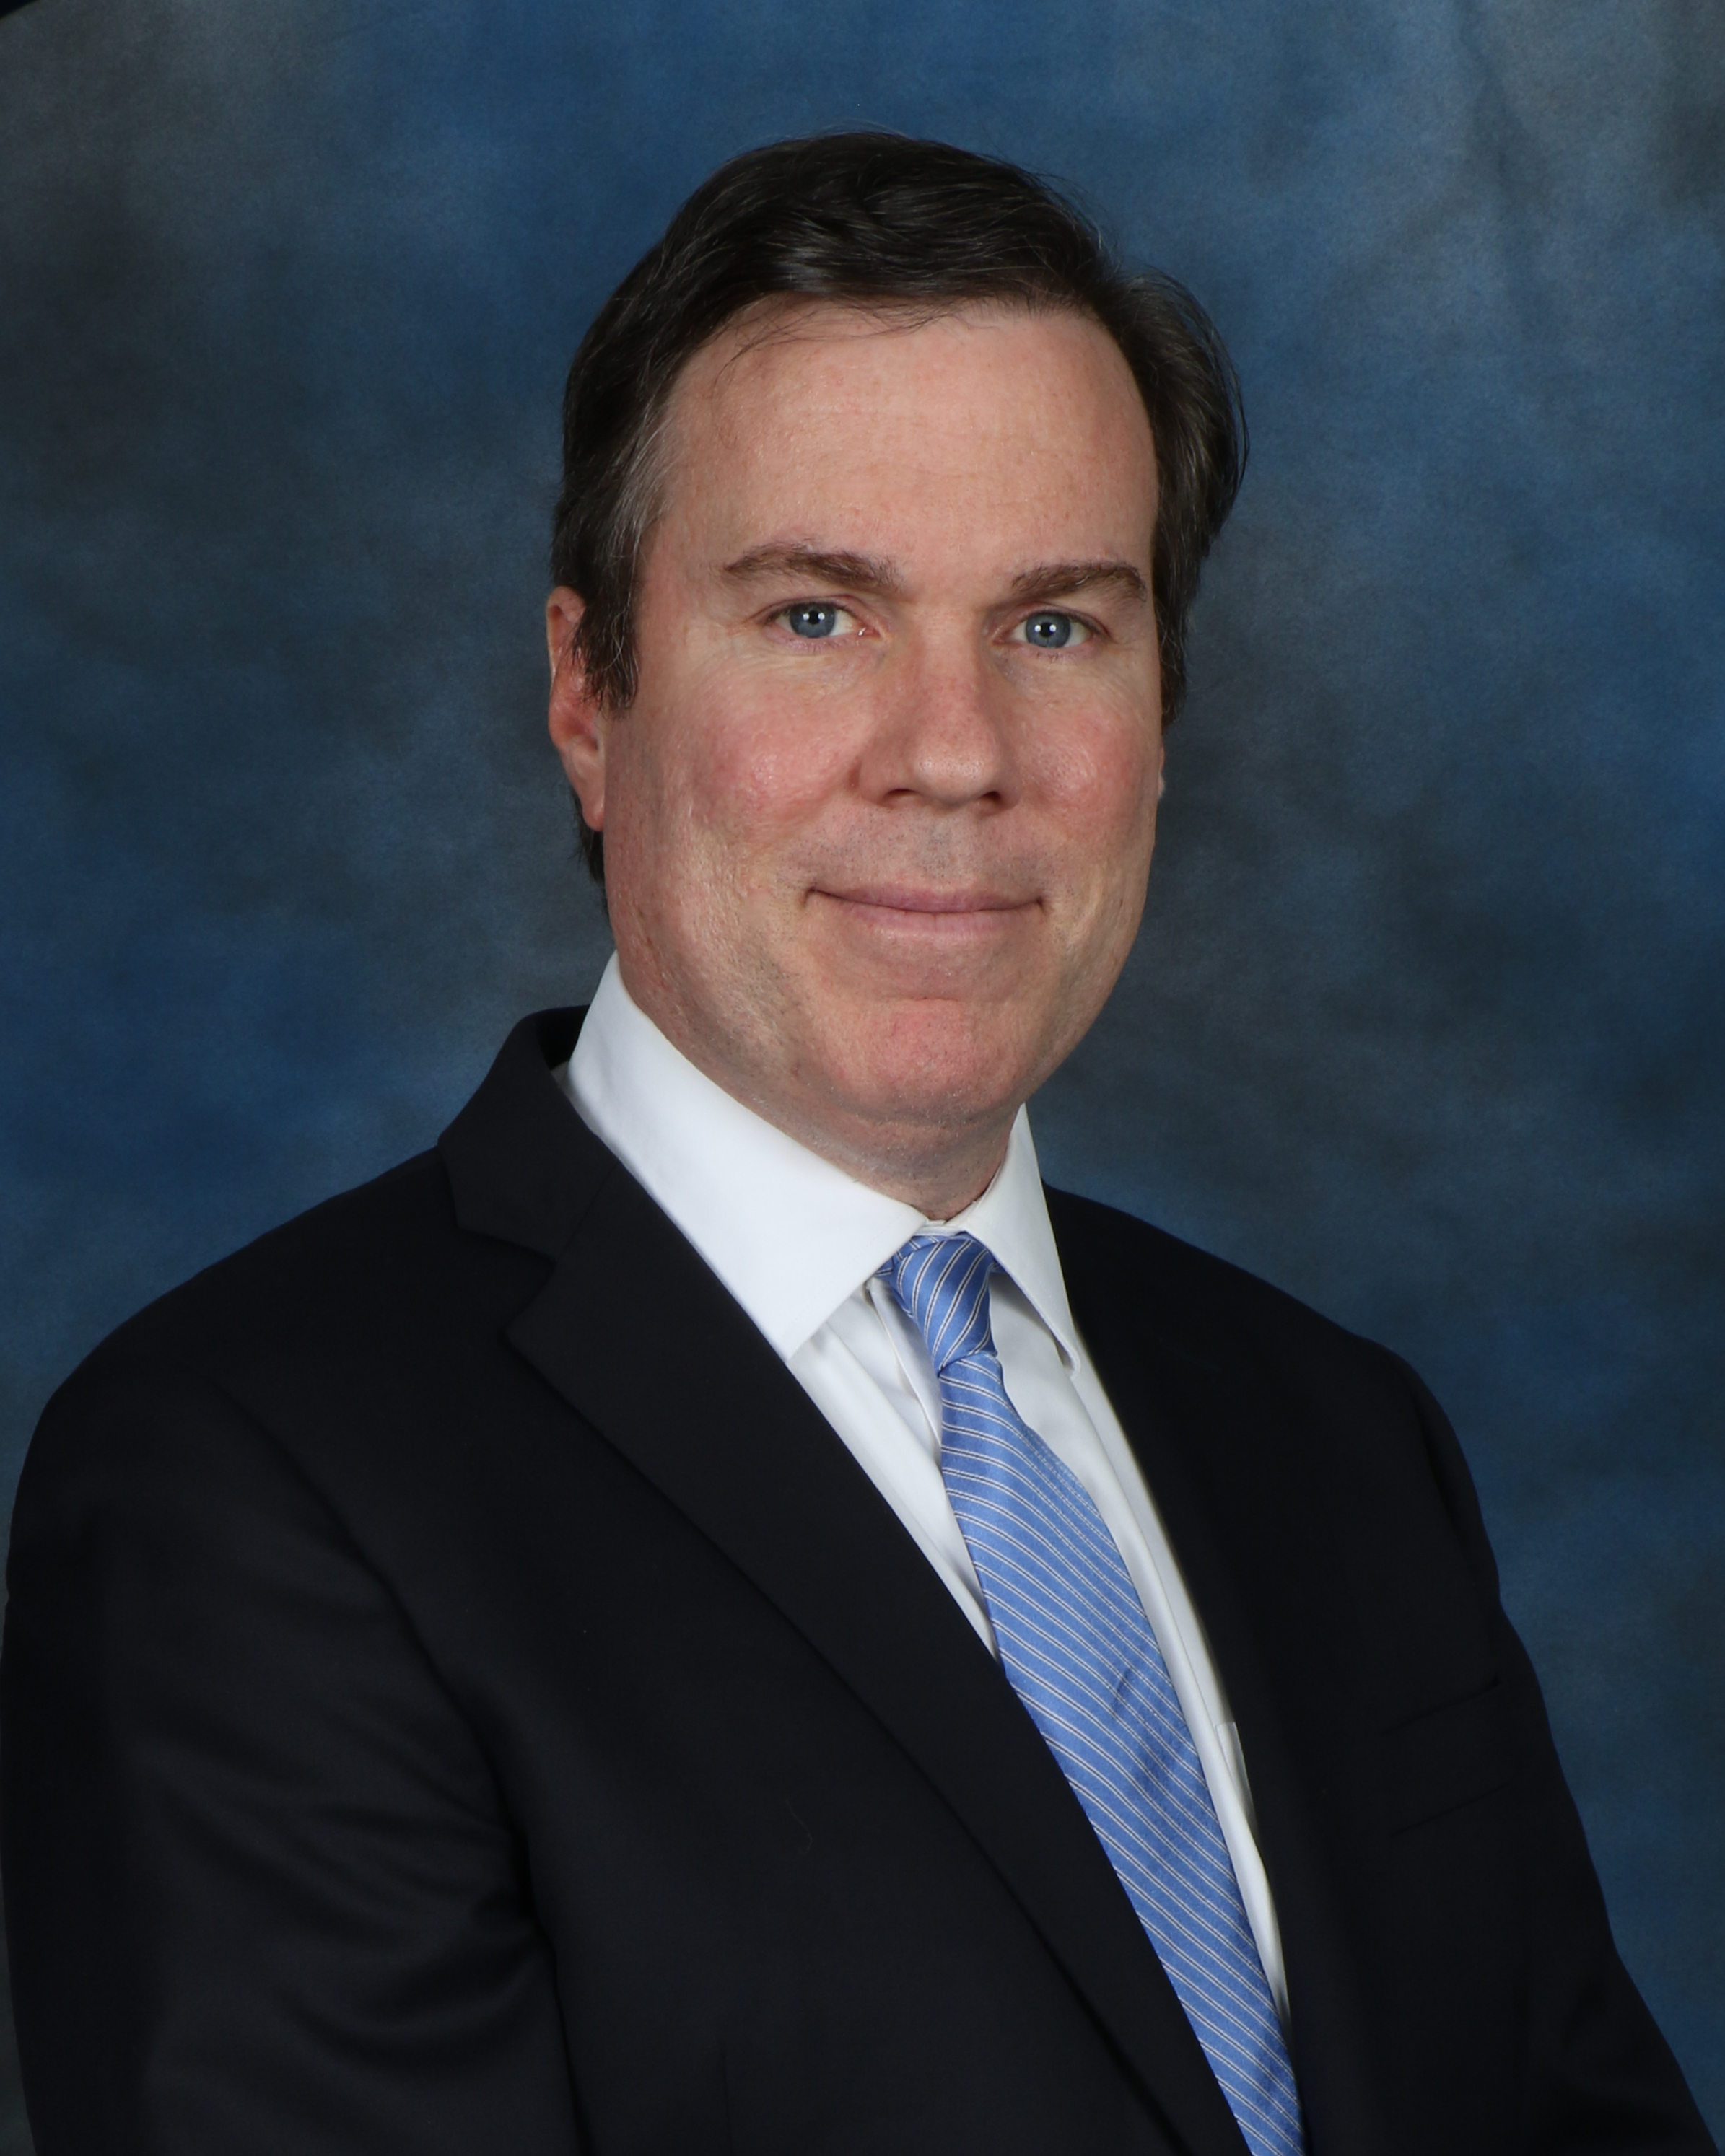 Thomas R. McConnell, who is "Of Counsel" at Bertone Piccini and will lead the firm's new family law practice.